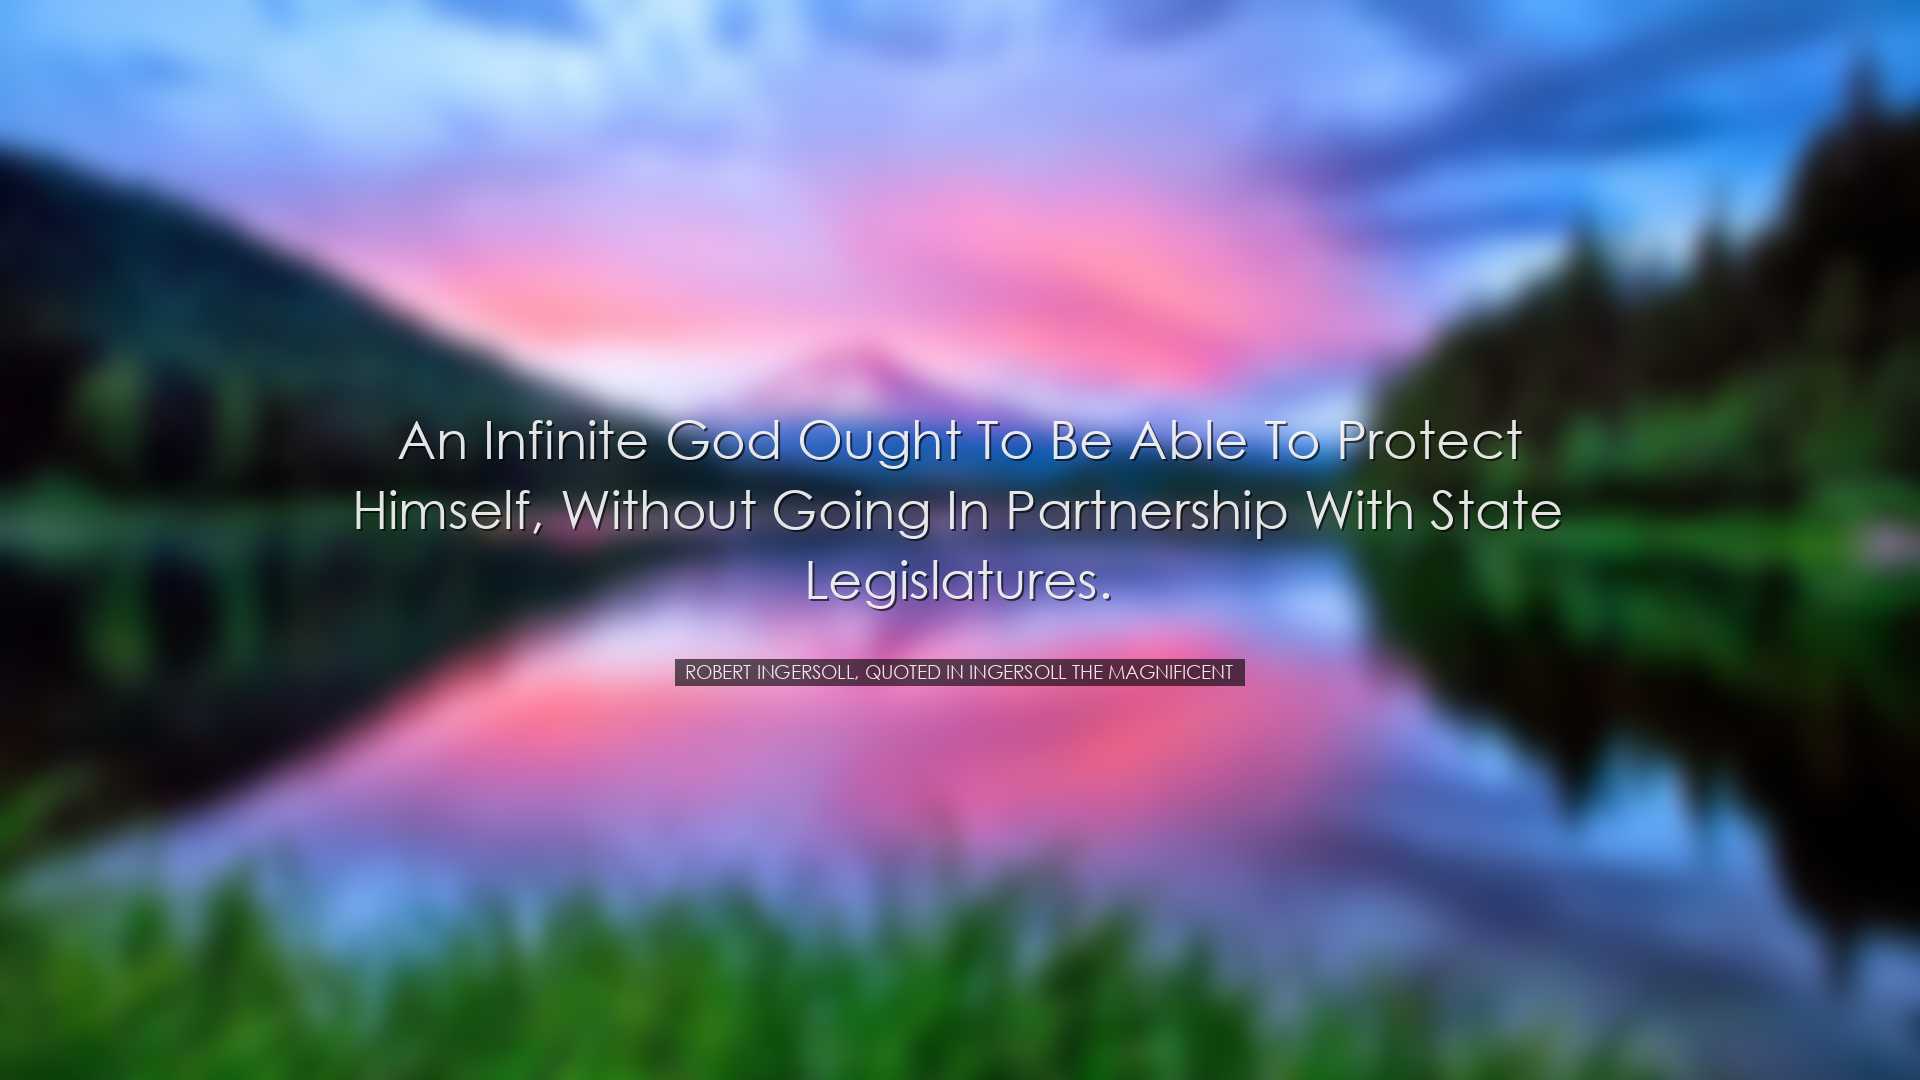 An infinite God ought to be able to protect Himself, without going